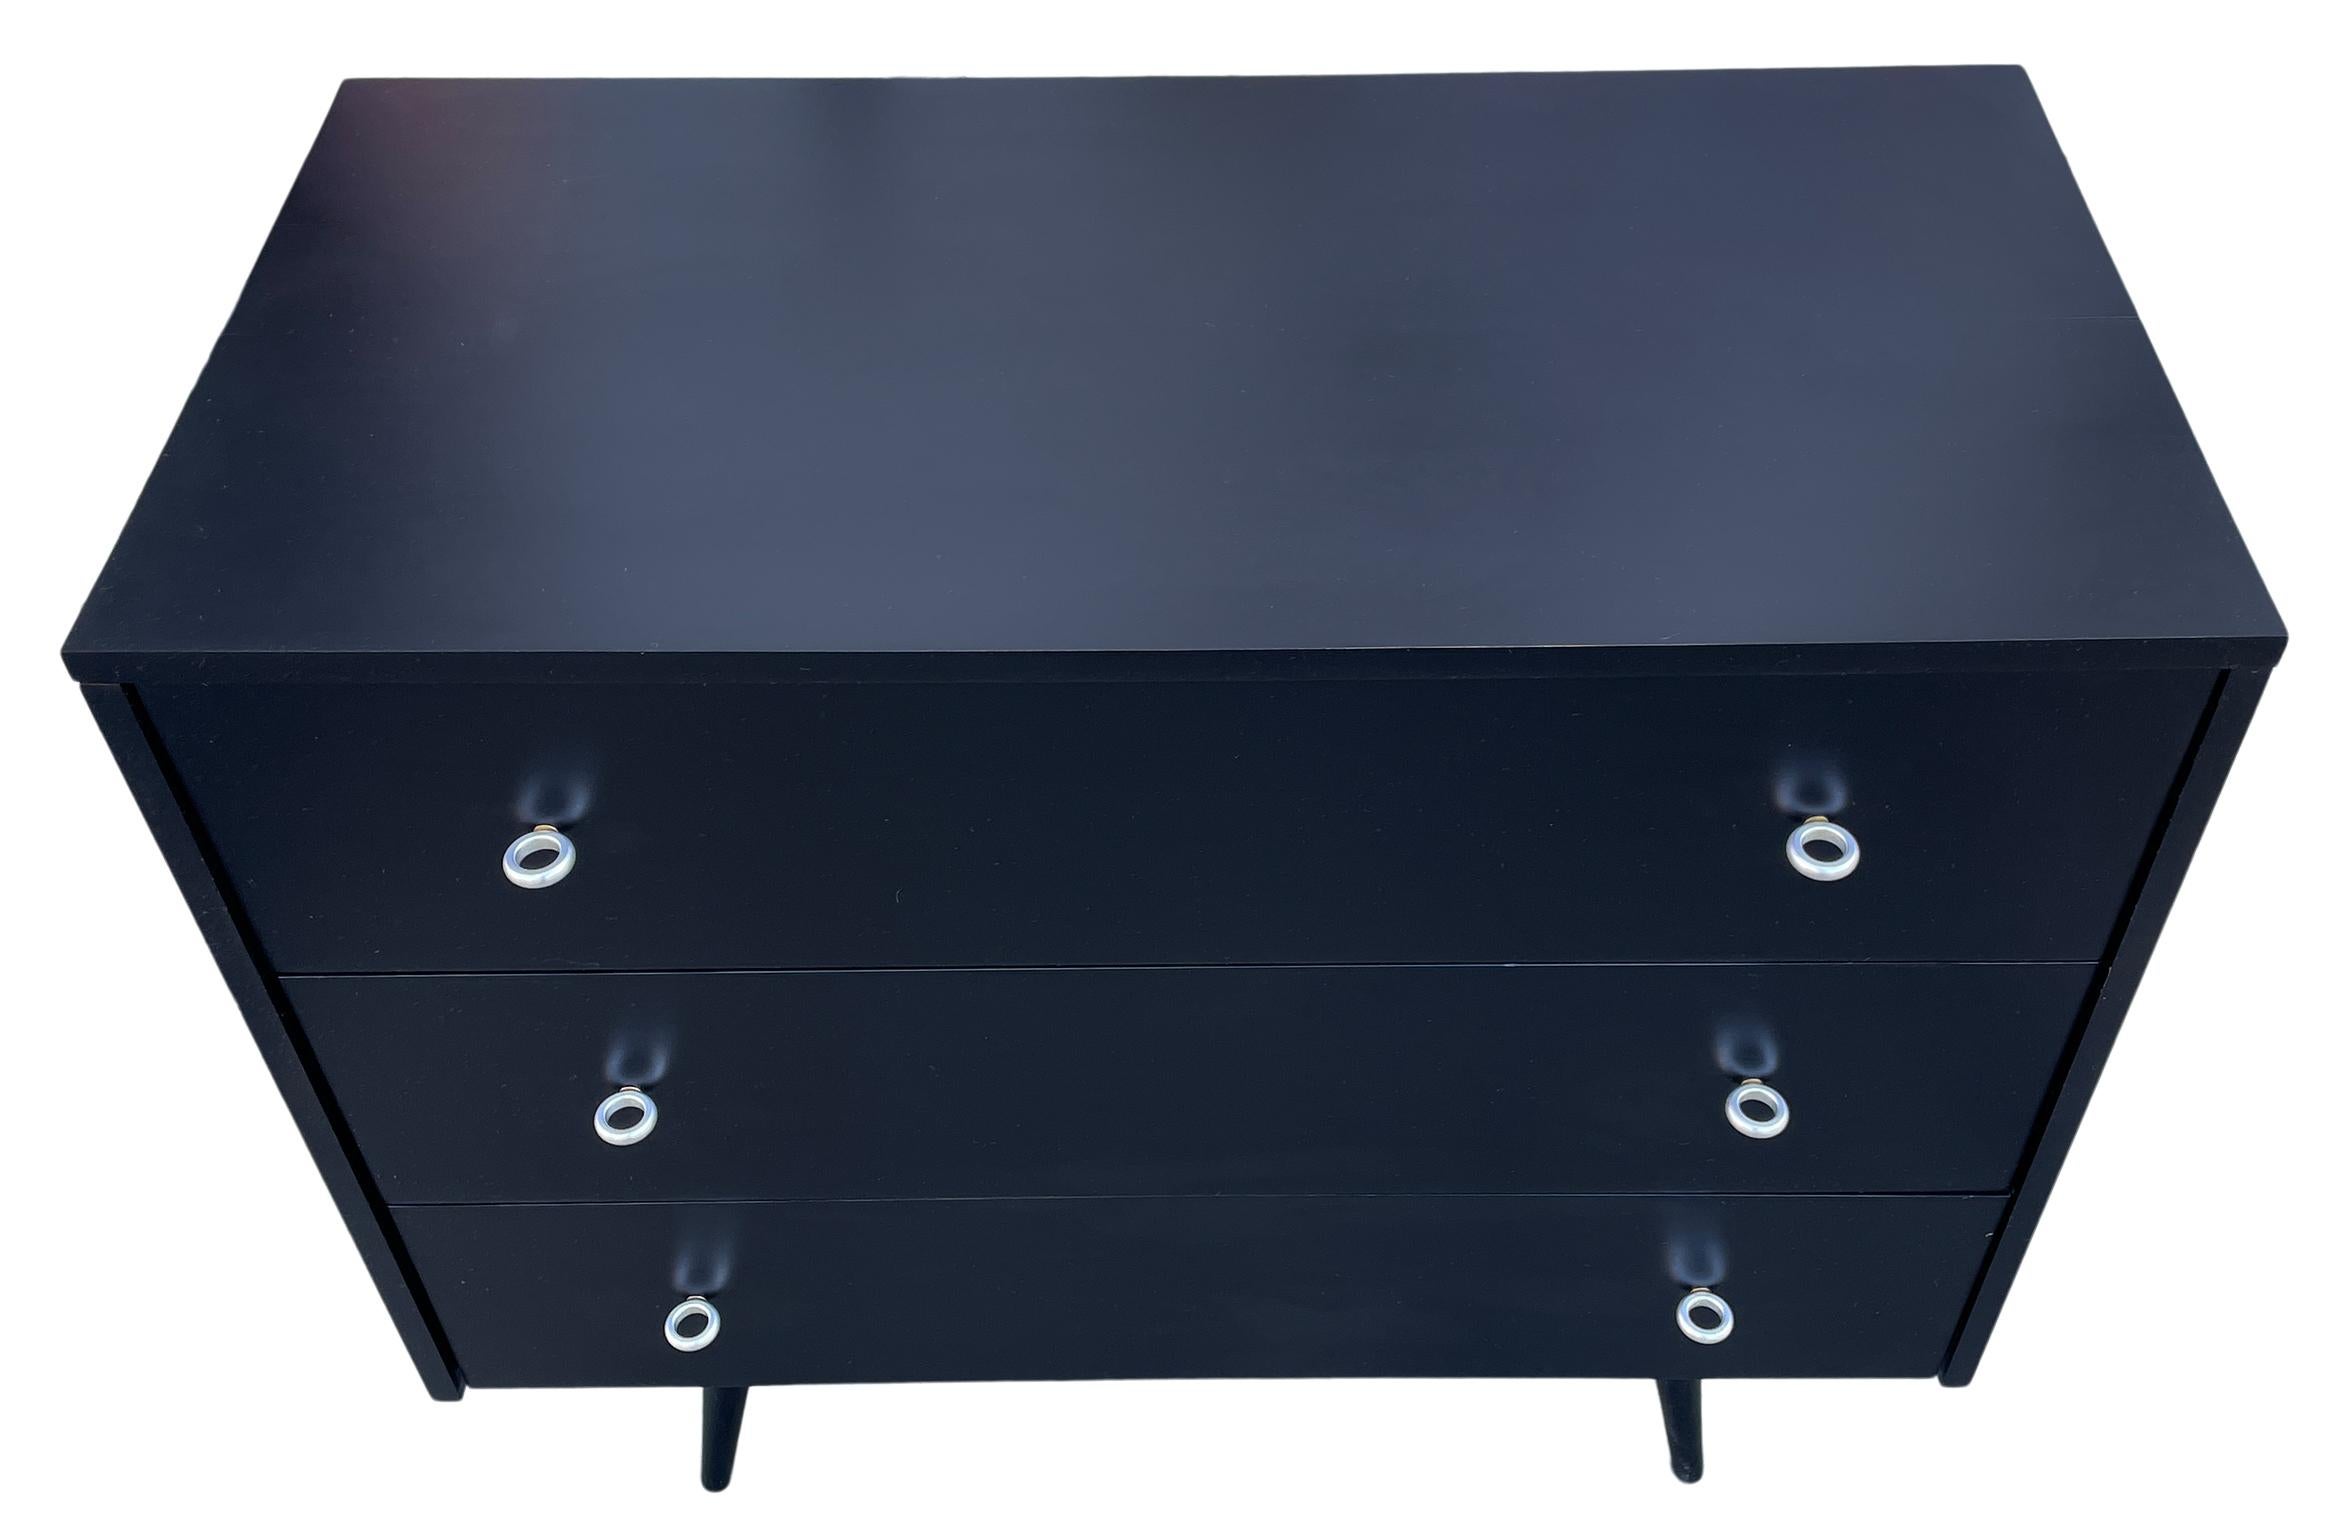 Mid Century Modern black lacquer three-drawer dresser by Paul McCobb for Winchendon Furniture Company. Part of the Planner Group. Located in NYC.

Measures: 36” W x 33.5” H x 18.25” D. Each drawer is 6” H.